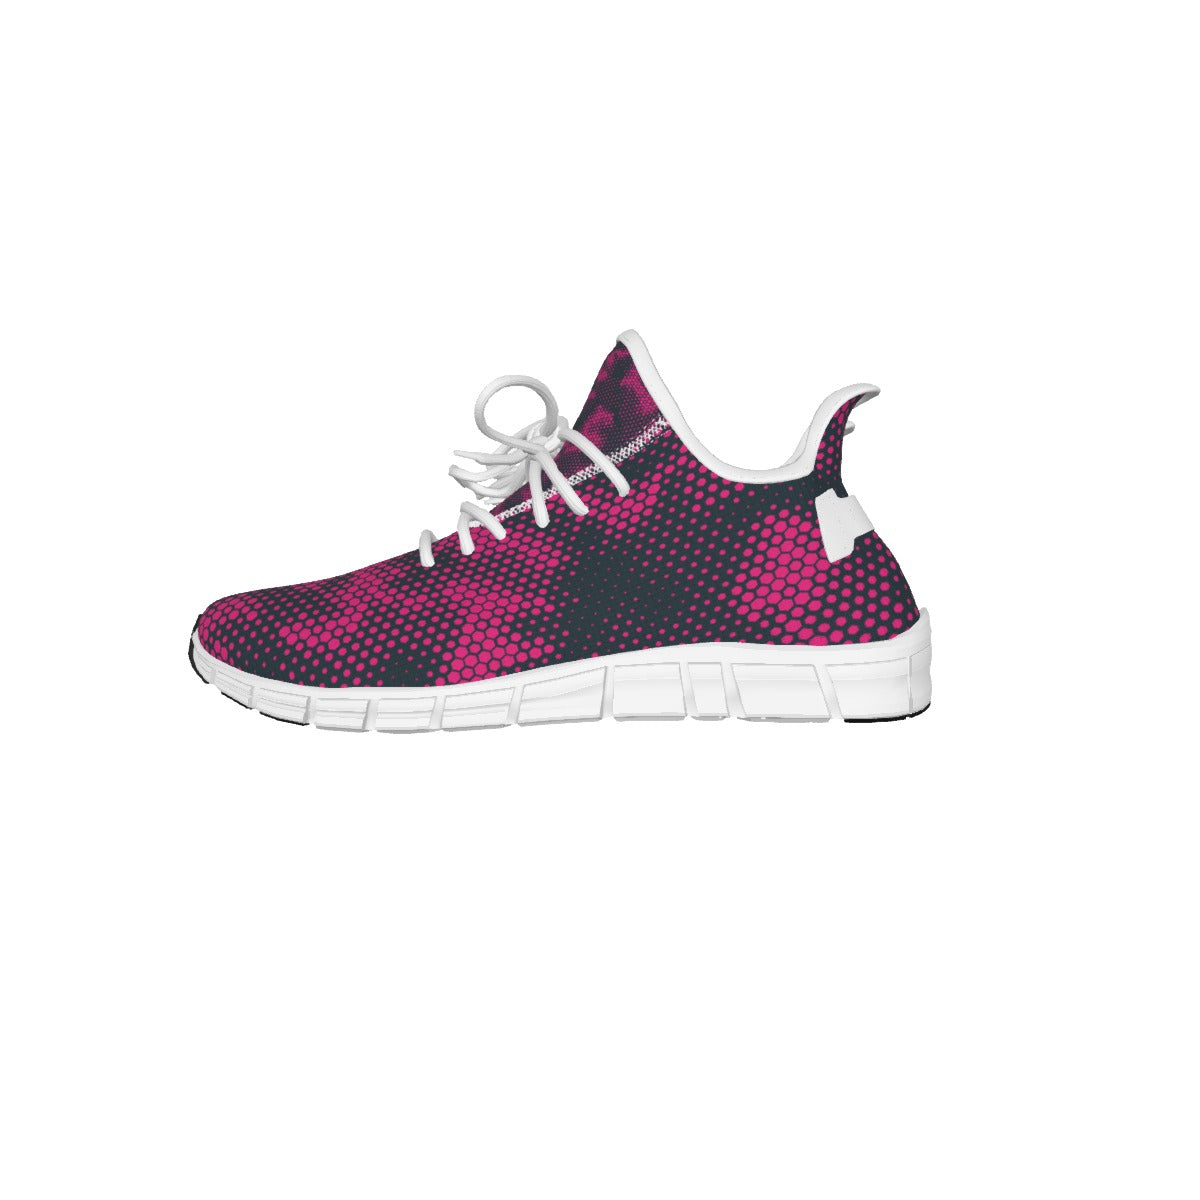 Pink Halftone Light woven running shoes - kayzers